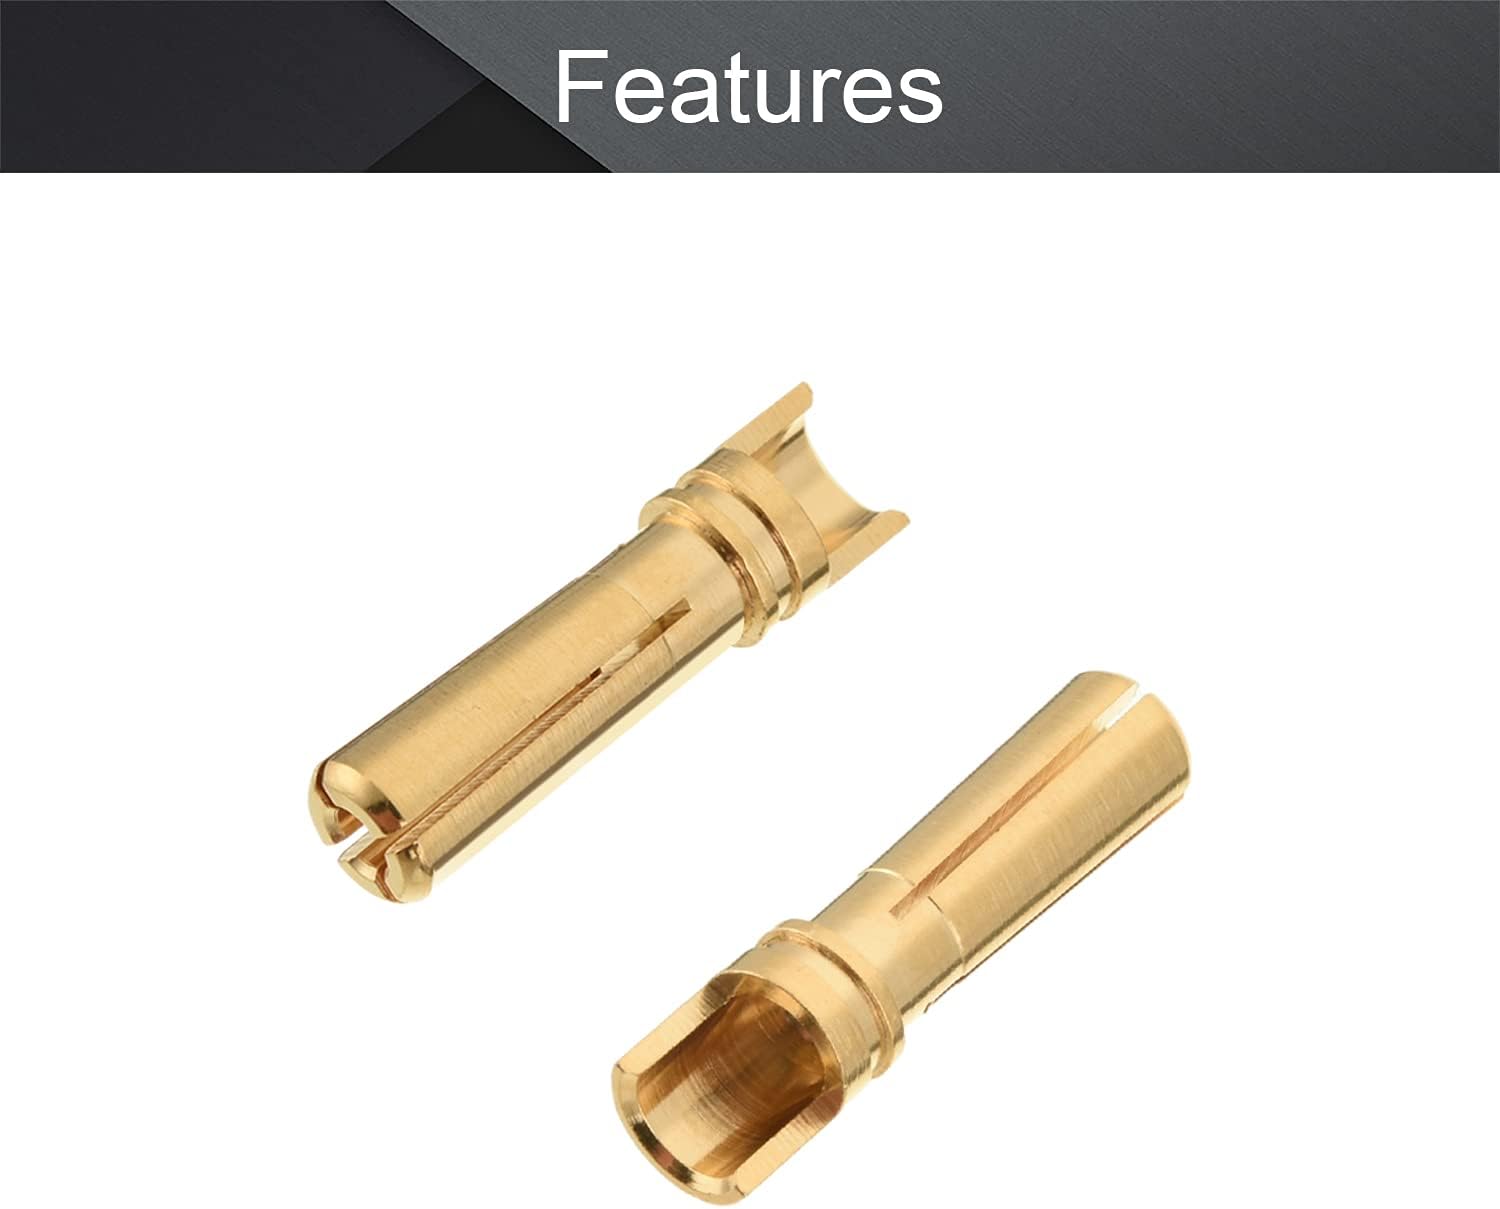 Fielect 4mm Bullets Connector Gold Plated Banana Plugs: A Reliable and Efficient Solution for RC Enthusiasts